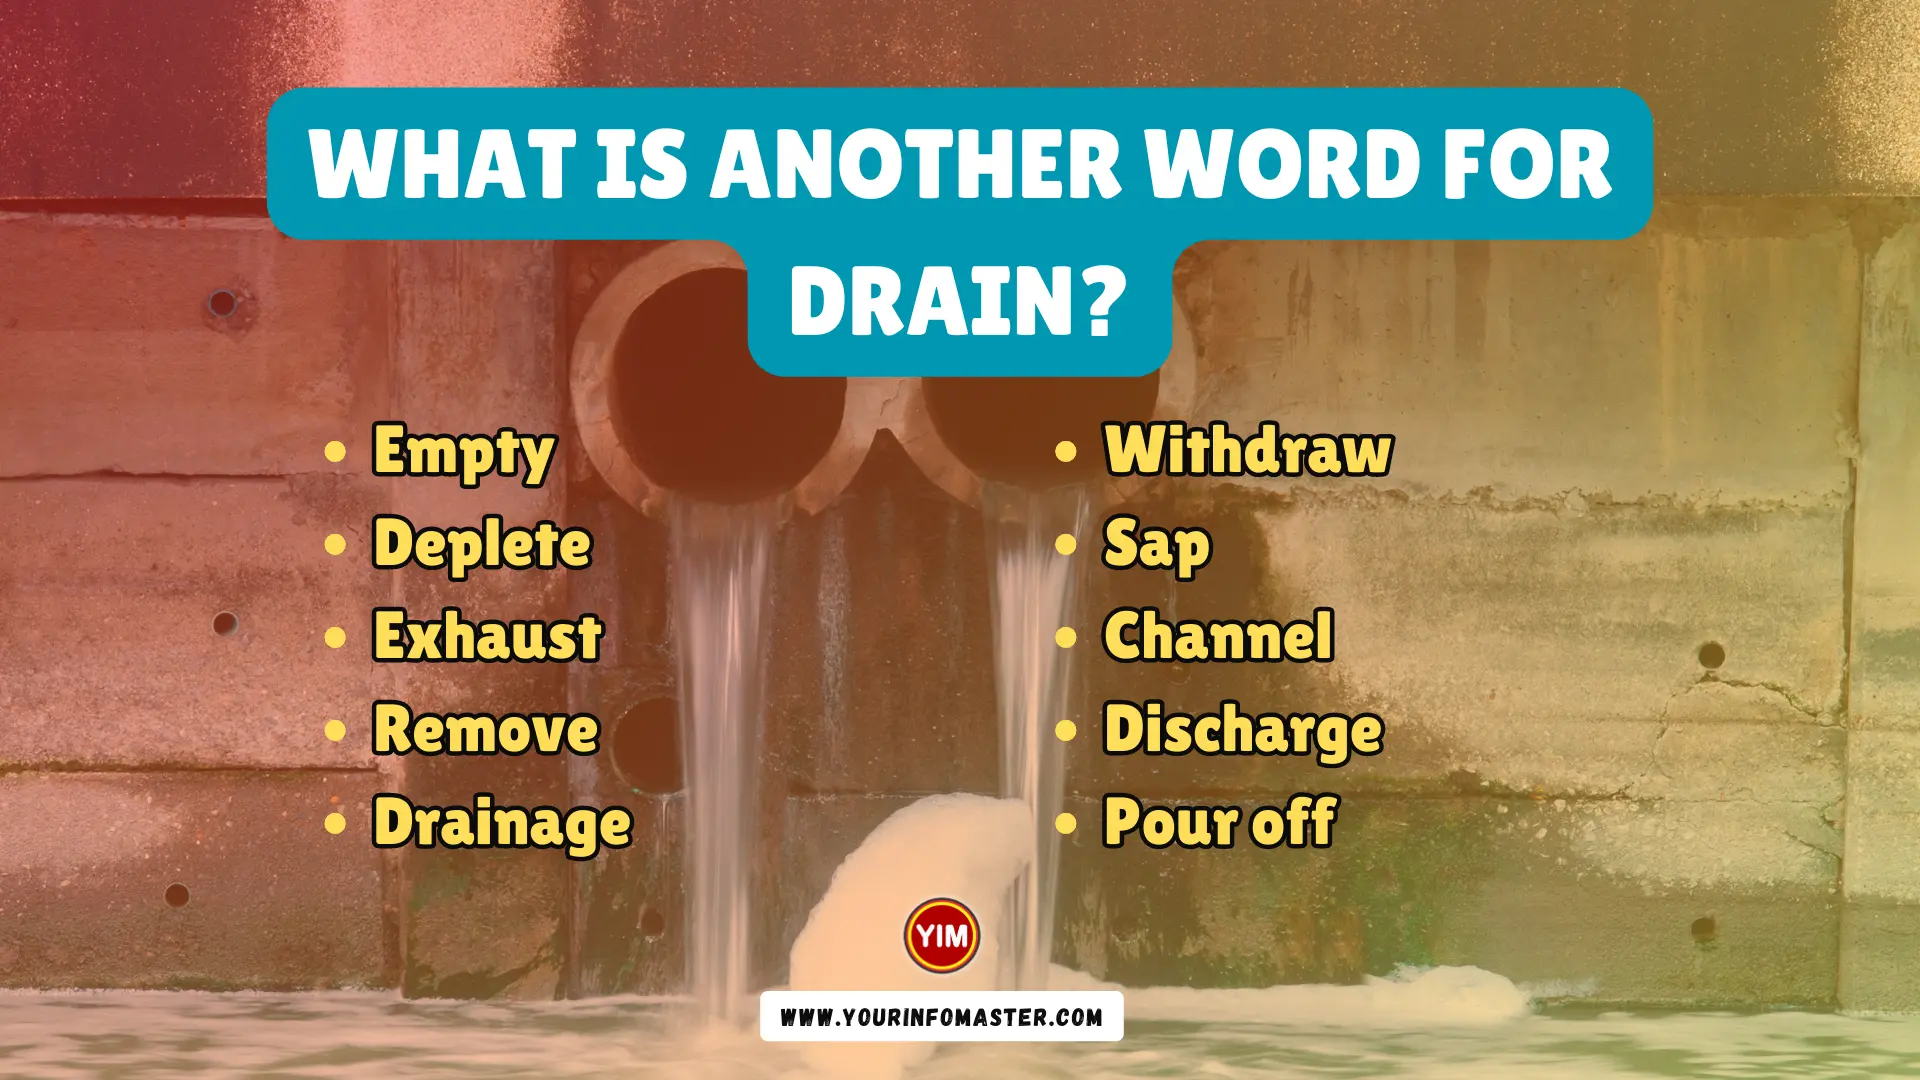 What is another word for Drain